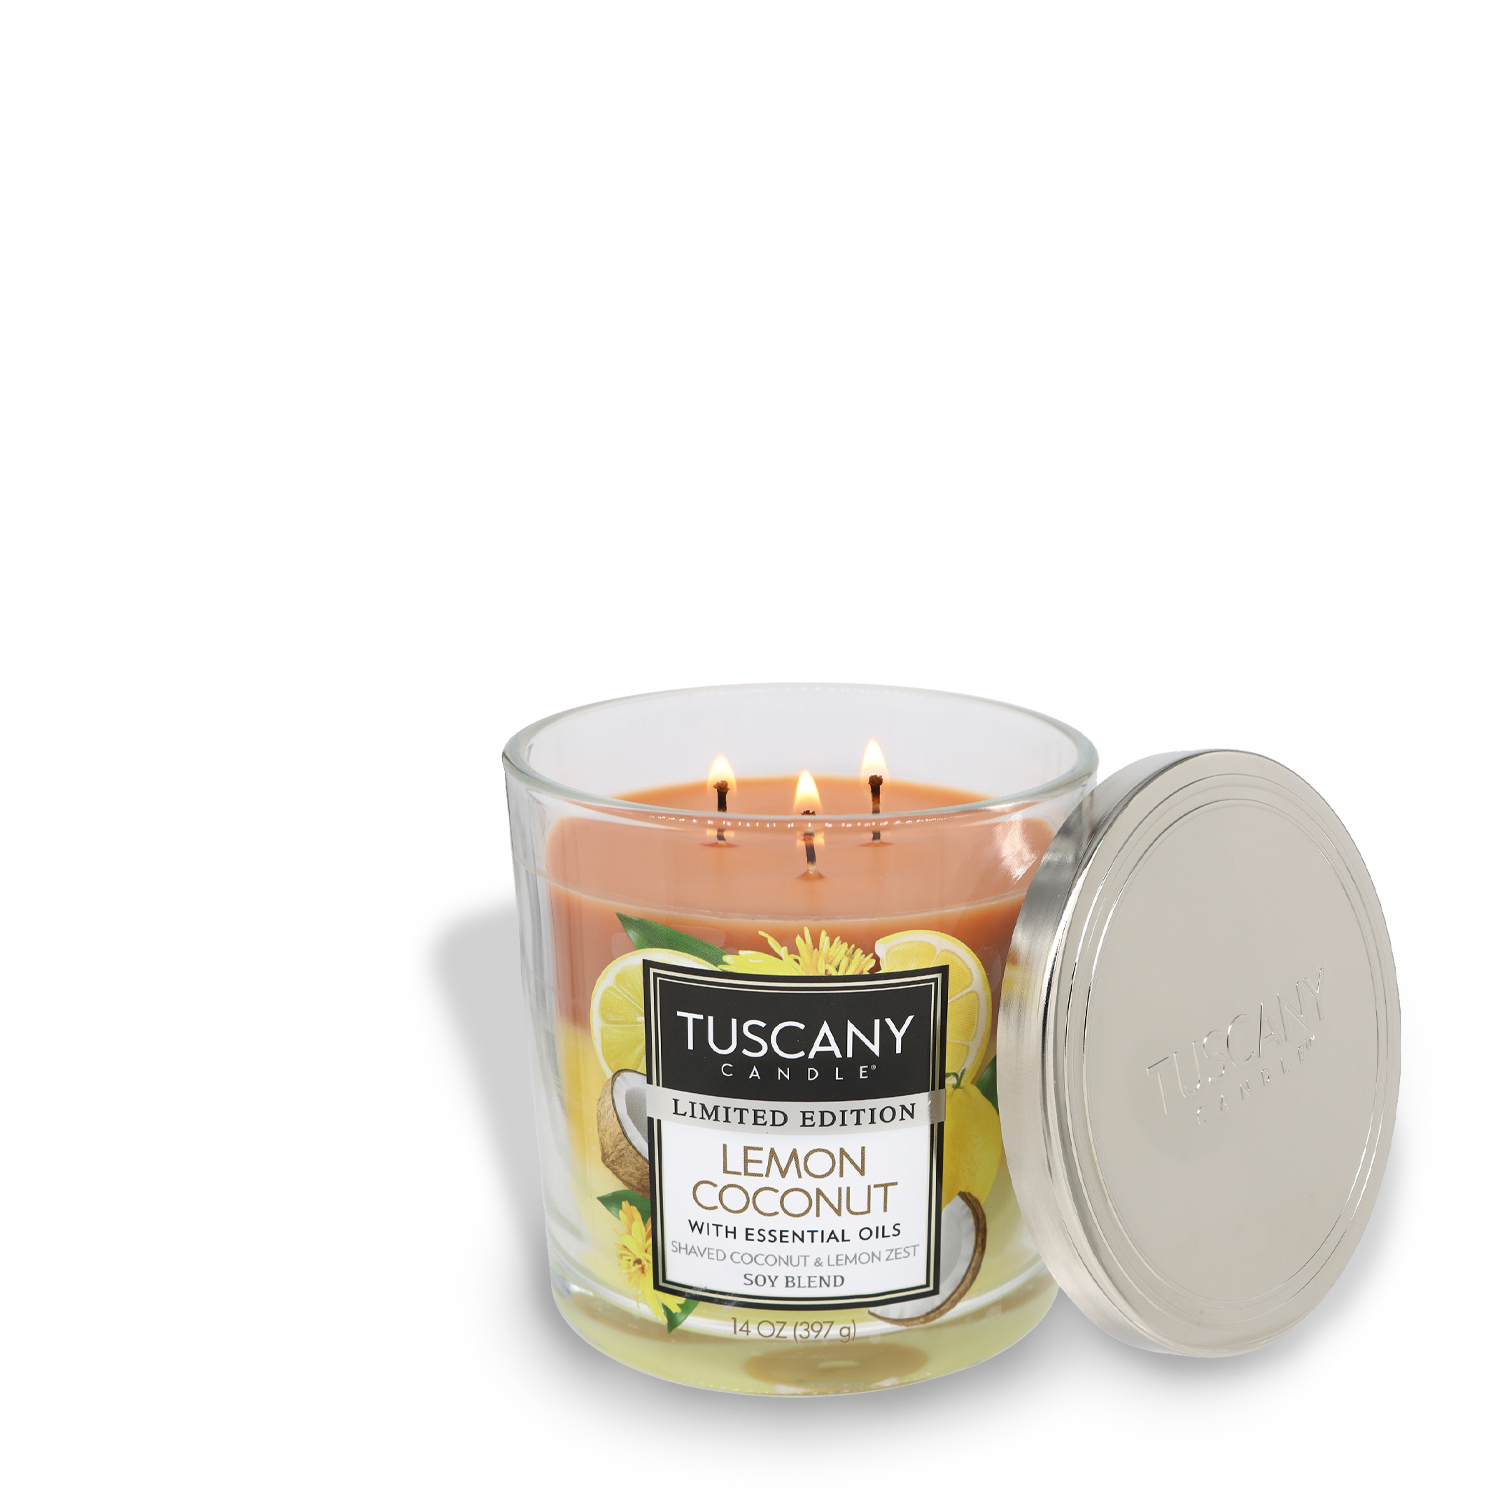 A Tuscany Candle® SEASONAL Lemon Coconut Long-Lasting Scented Jar Candle (14 oz) with a lemon coconut label, accompanied by its metallic lid placed on the side.